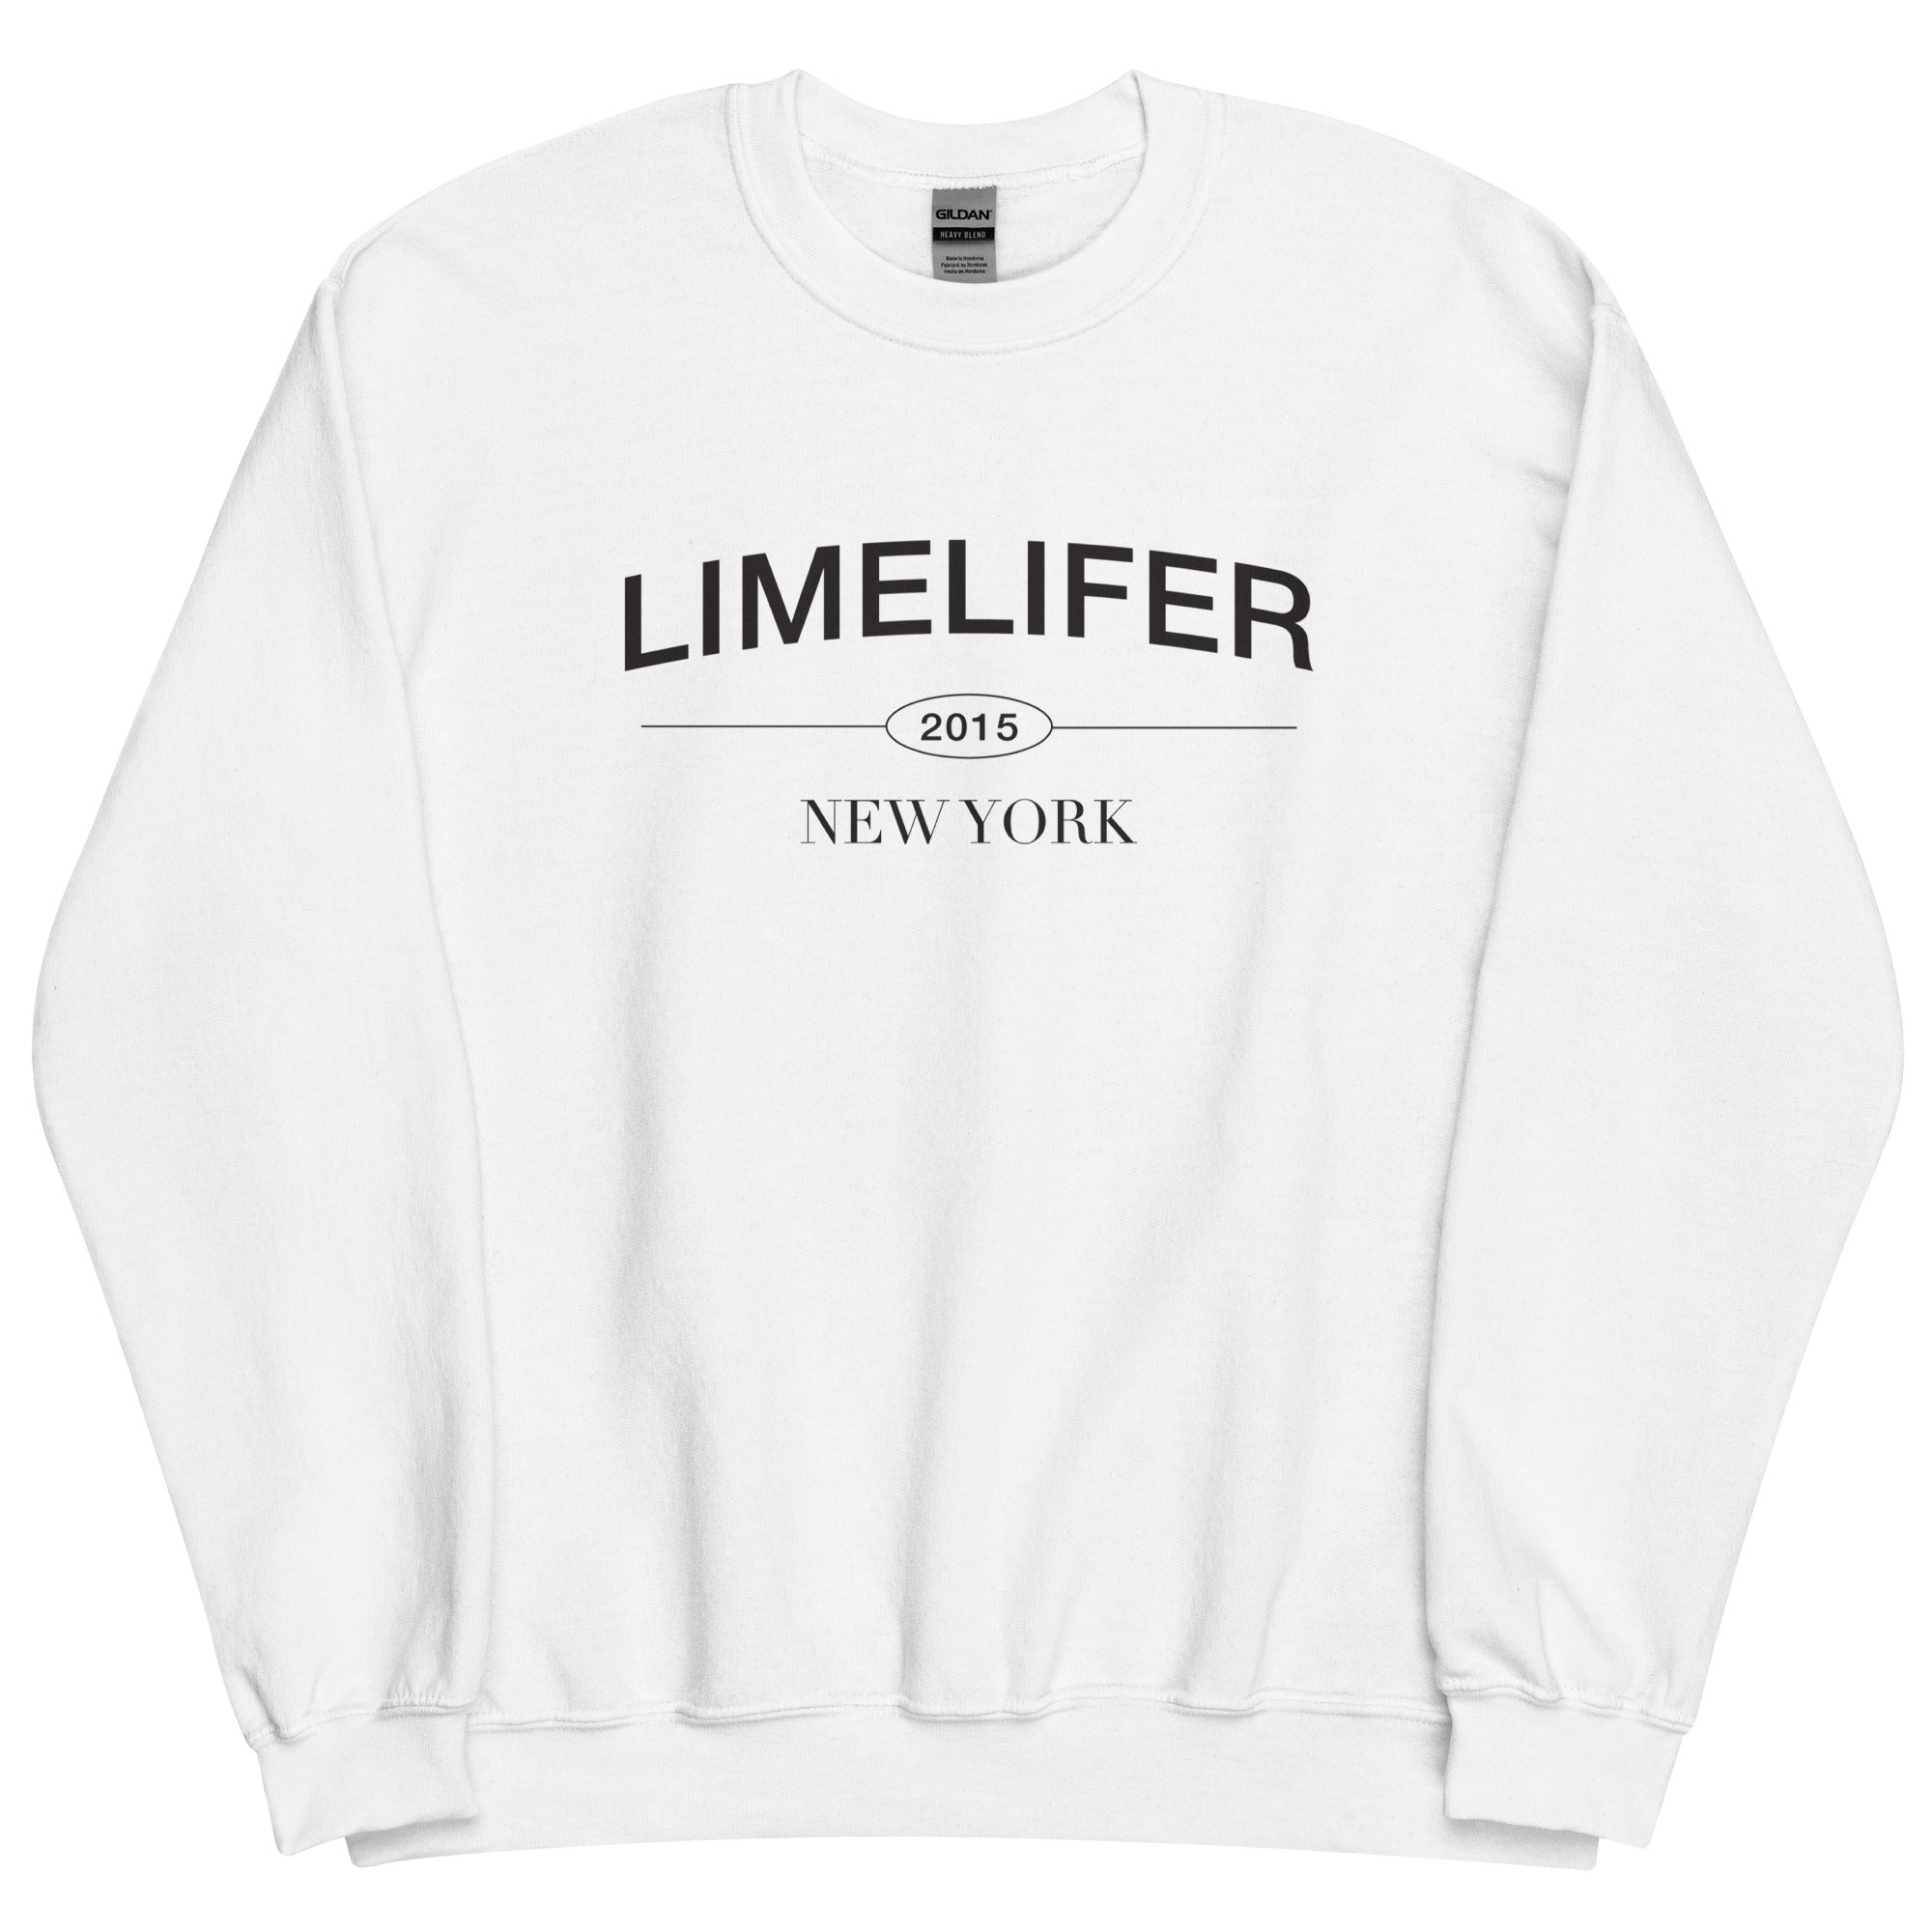 LIMELIFER NY - Unisex Sweatshirt in Sport Grey and White